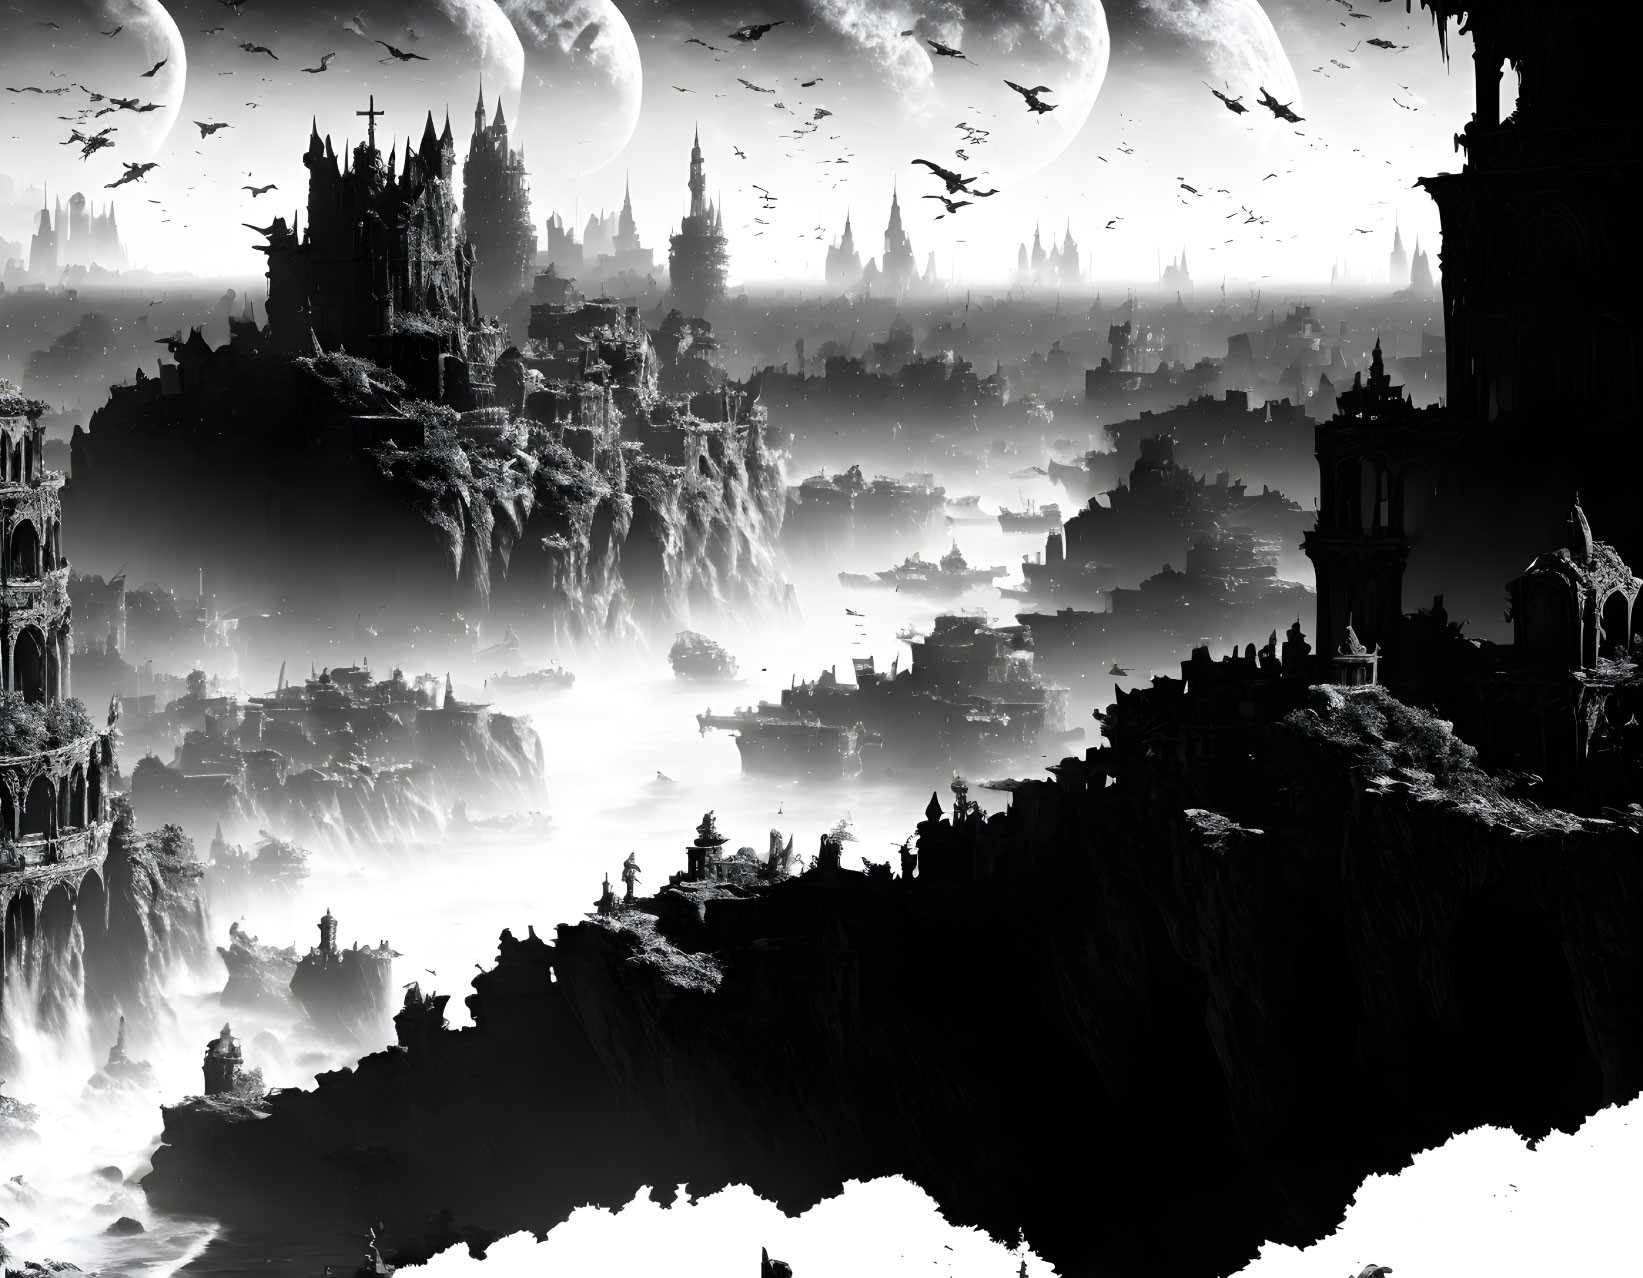 Monochromatic fantasy landscape with floating islands, gothic castles, waterfalls, and dual moons